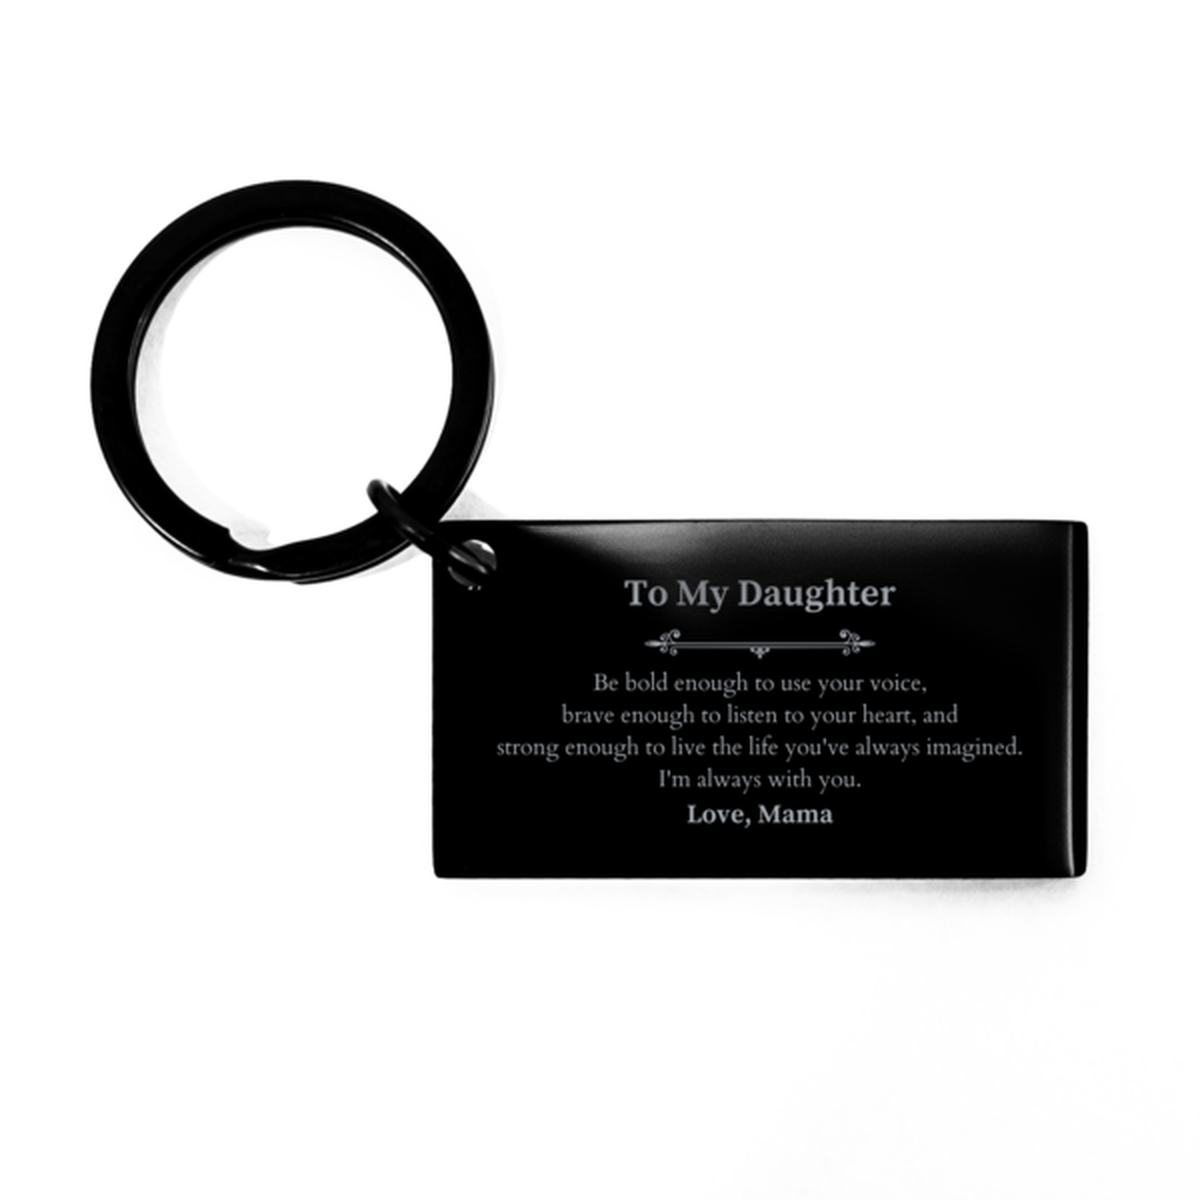 Keepsake Daughter Keychain Gift Idea Graduation Christmas Birthday Daughter from Mama, Daughter Be bold enough to use your voice, brave enough to listen to your heart. Love, Mama